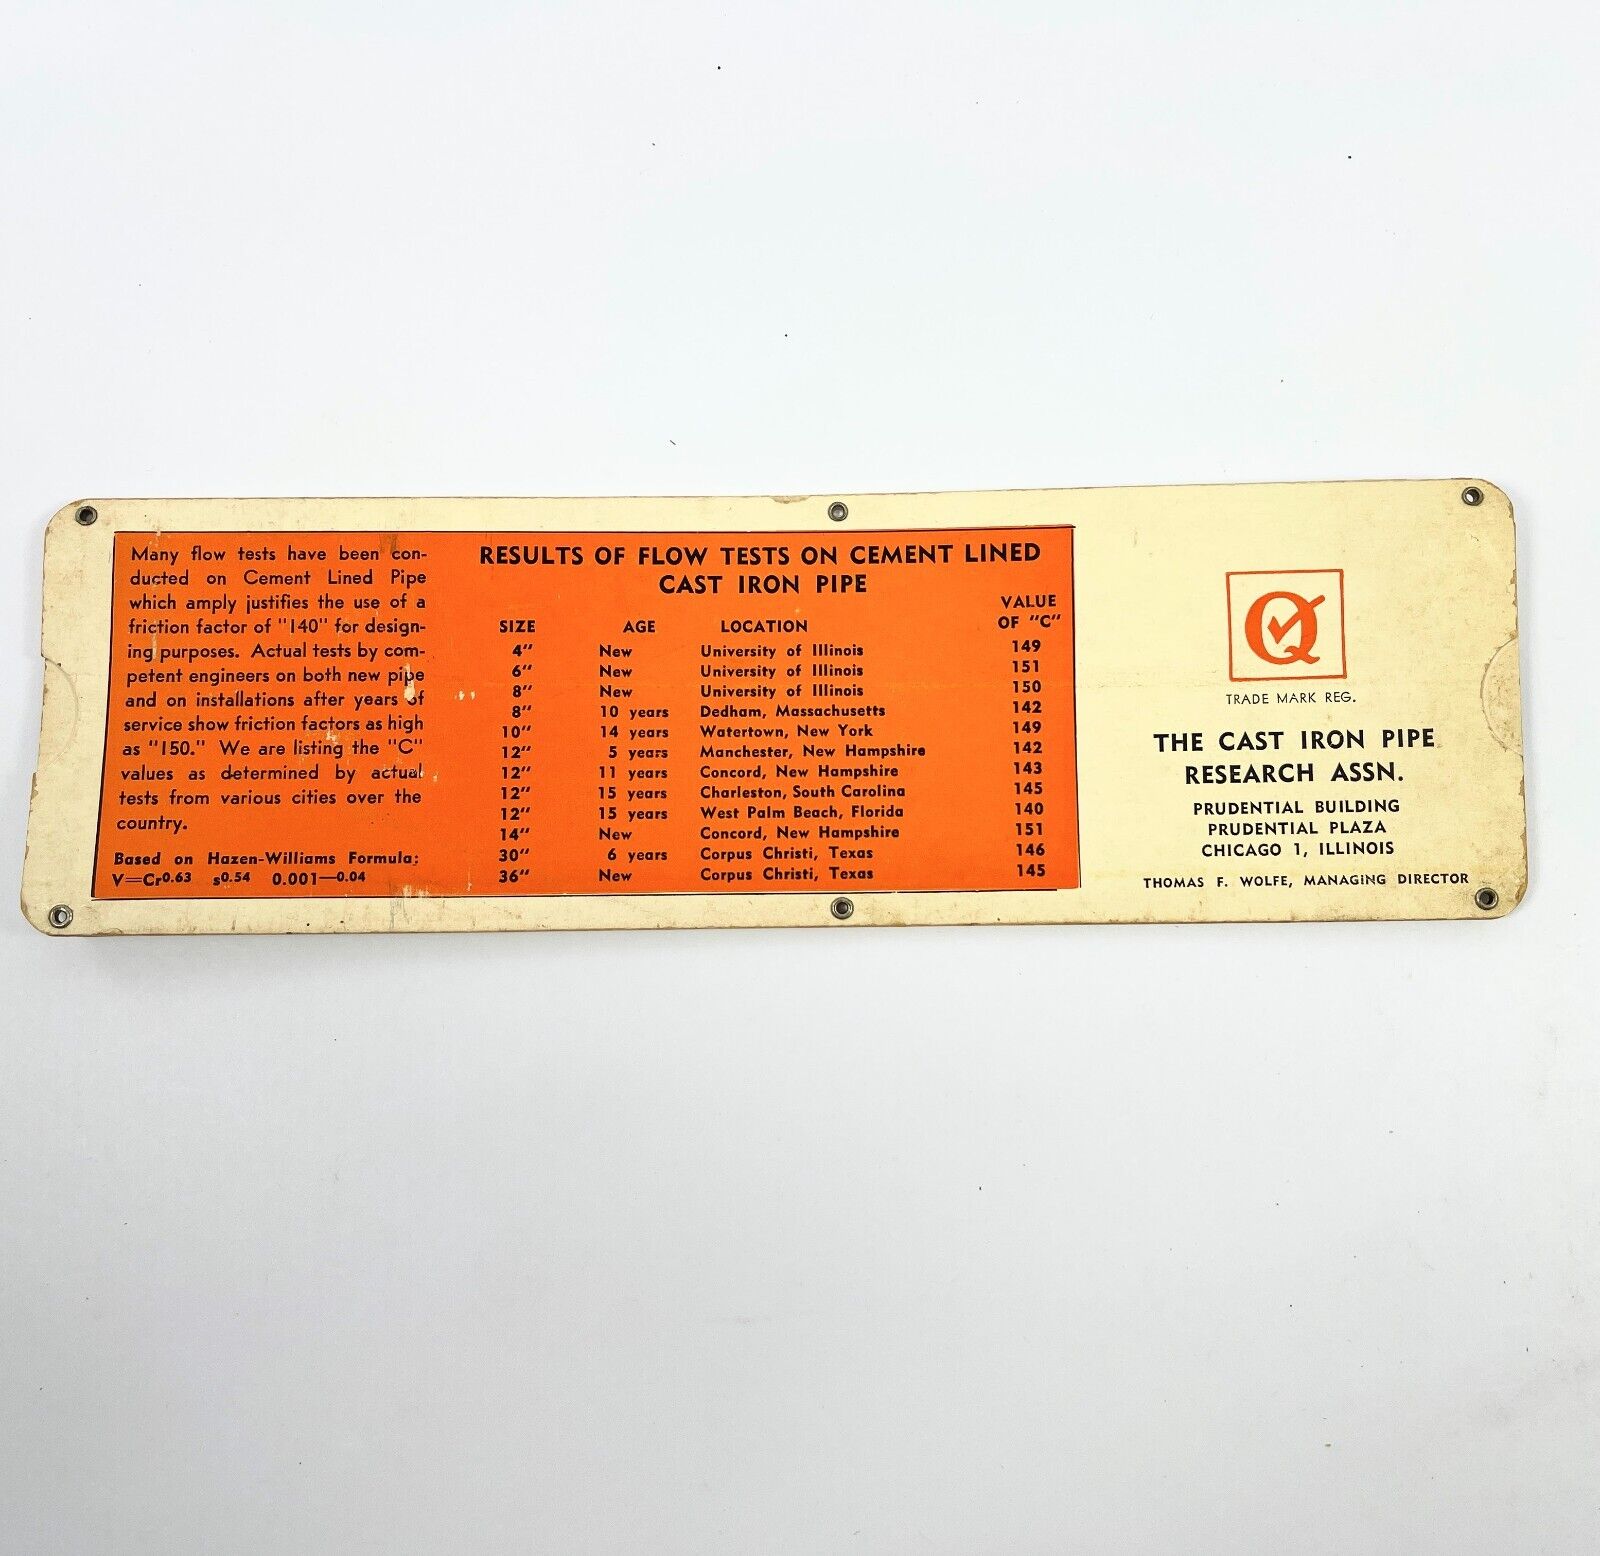 Loss of Head Slide Rule Cast Iron Pipe Research Assn vintage advertising